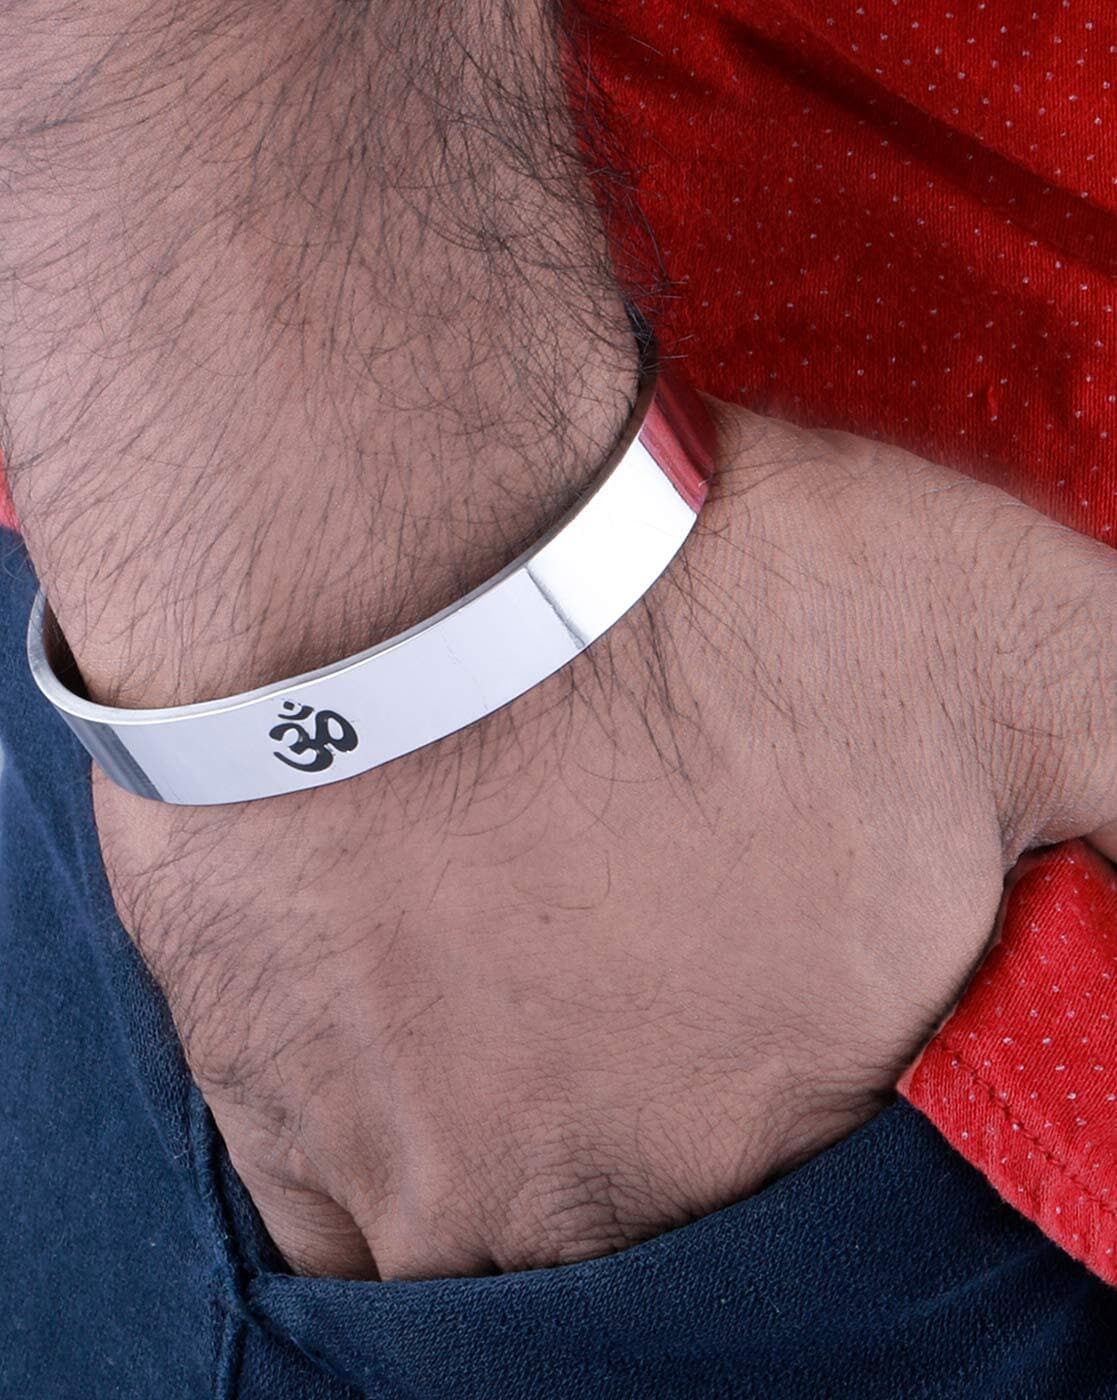 The Best Silver Bracelets for Men On Any Budget  Silveradda